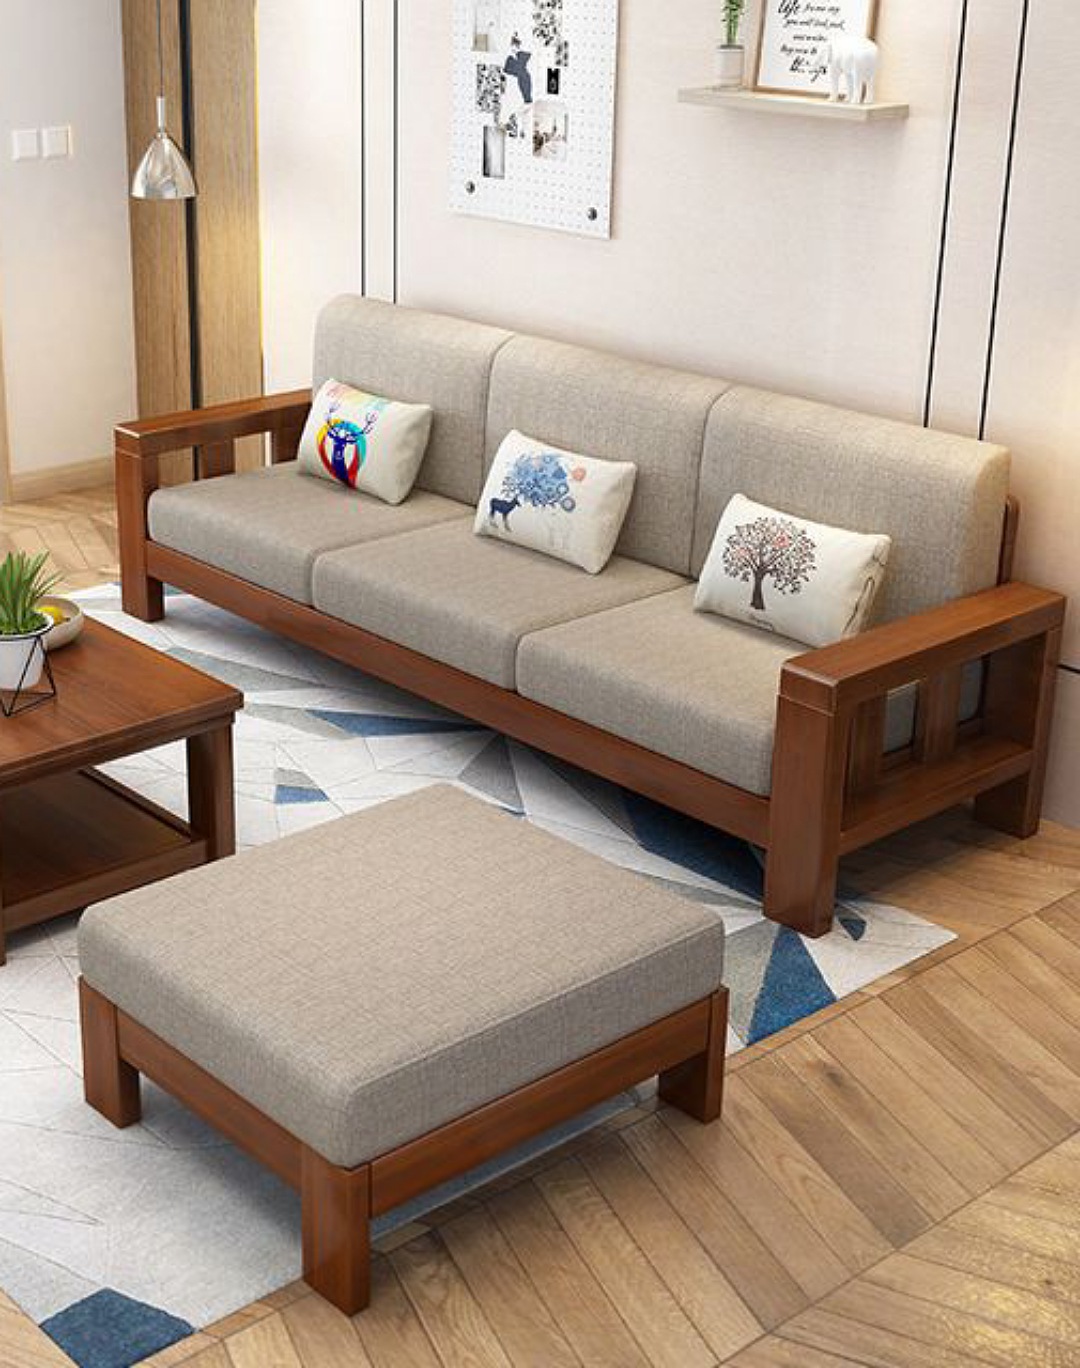 Wooden 3 seater sofa